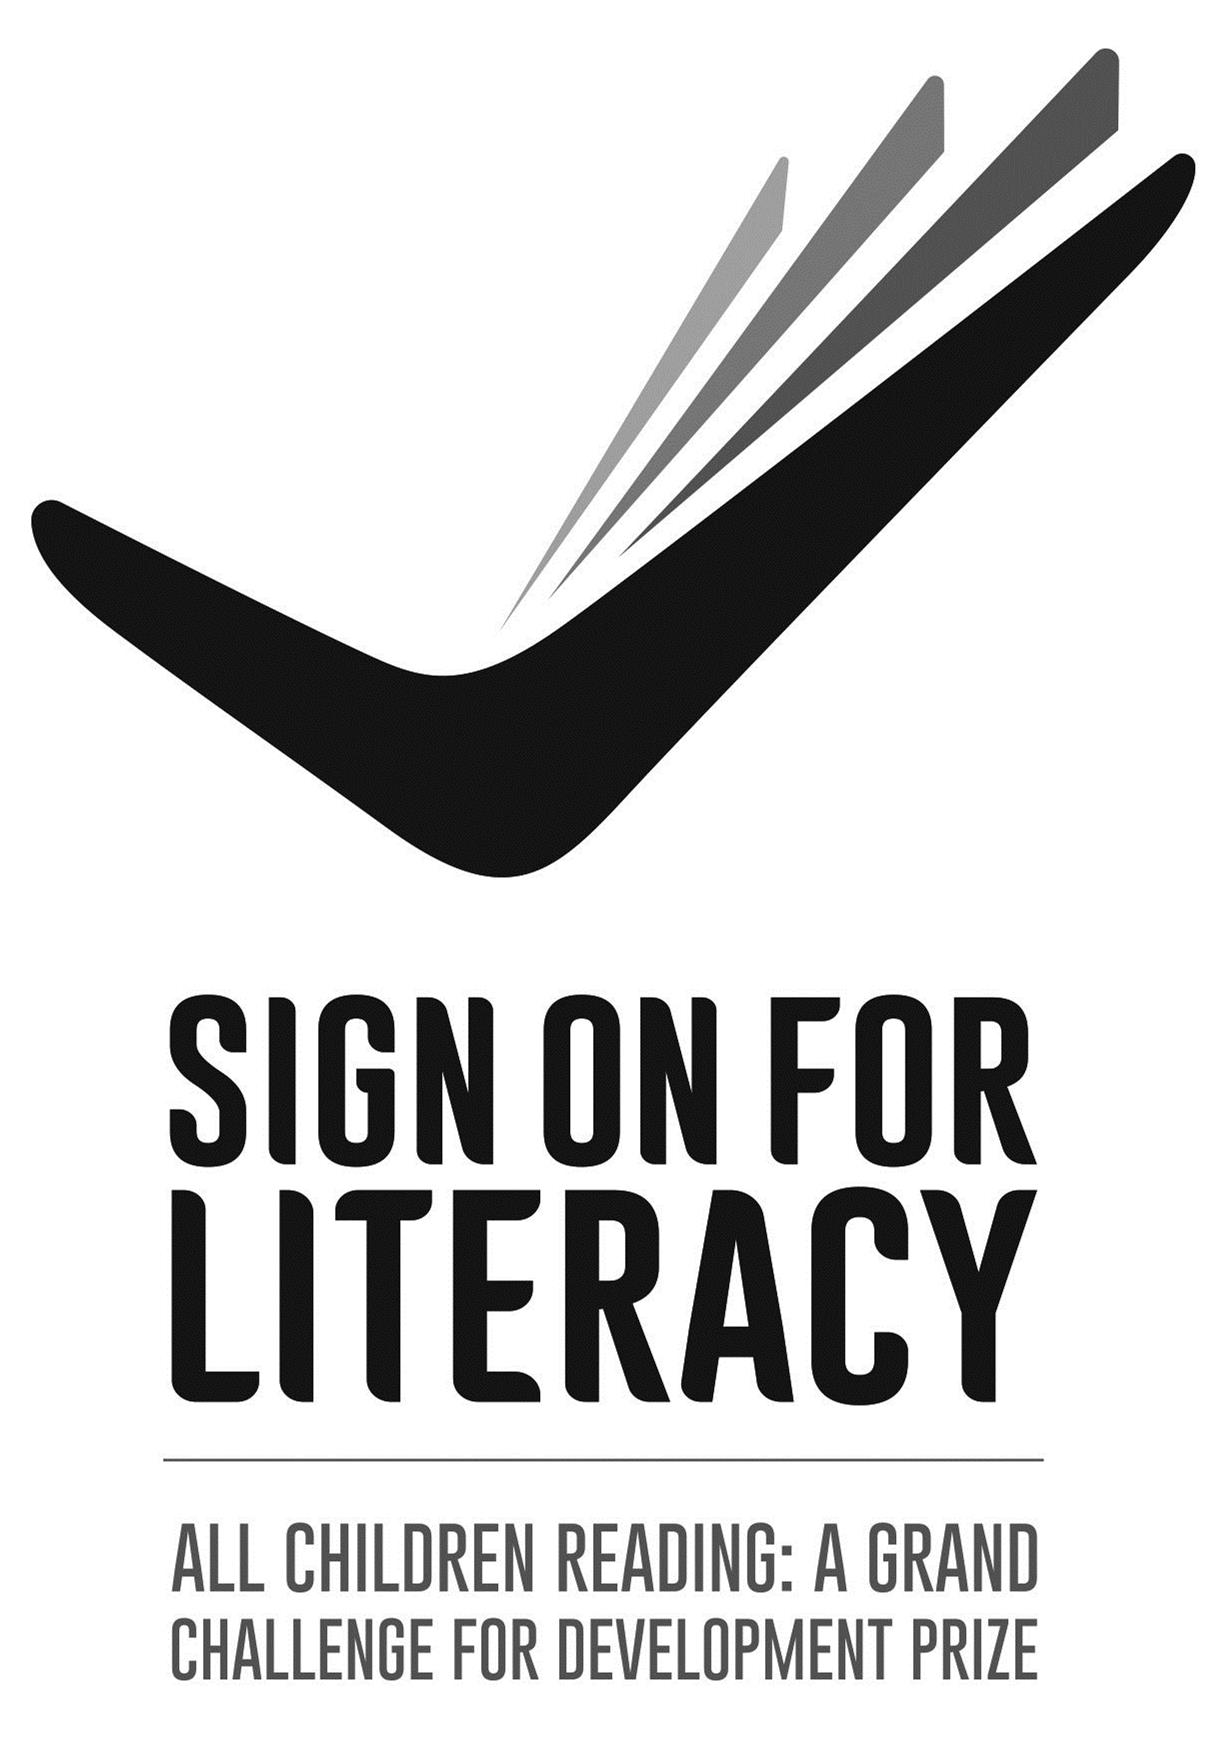  SIGN ON FOR LITERACY ALL CHILDREN READING A GRAND CHALLENGE FOR DEVELOPMENT PRIZE